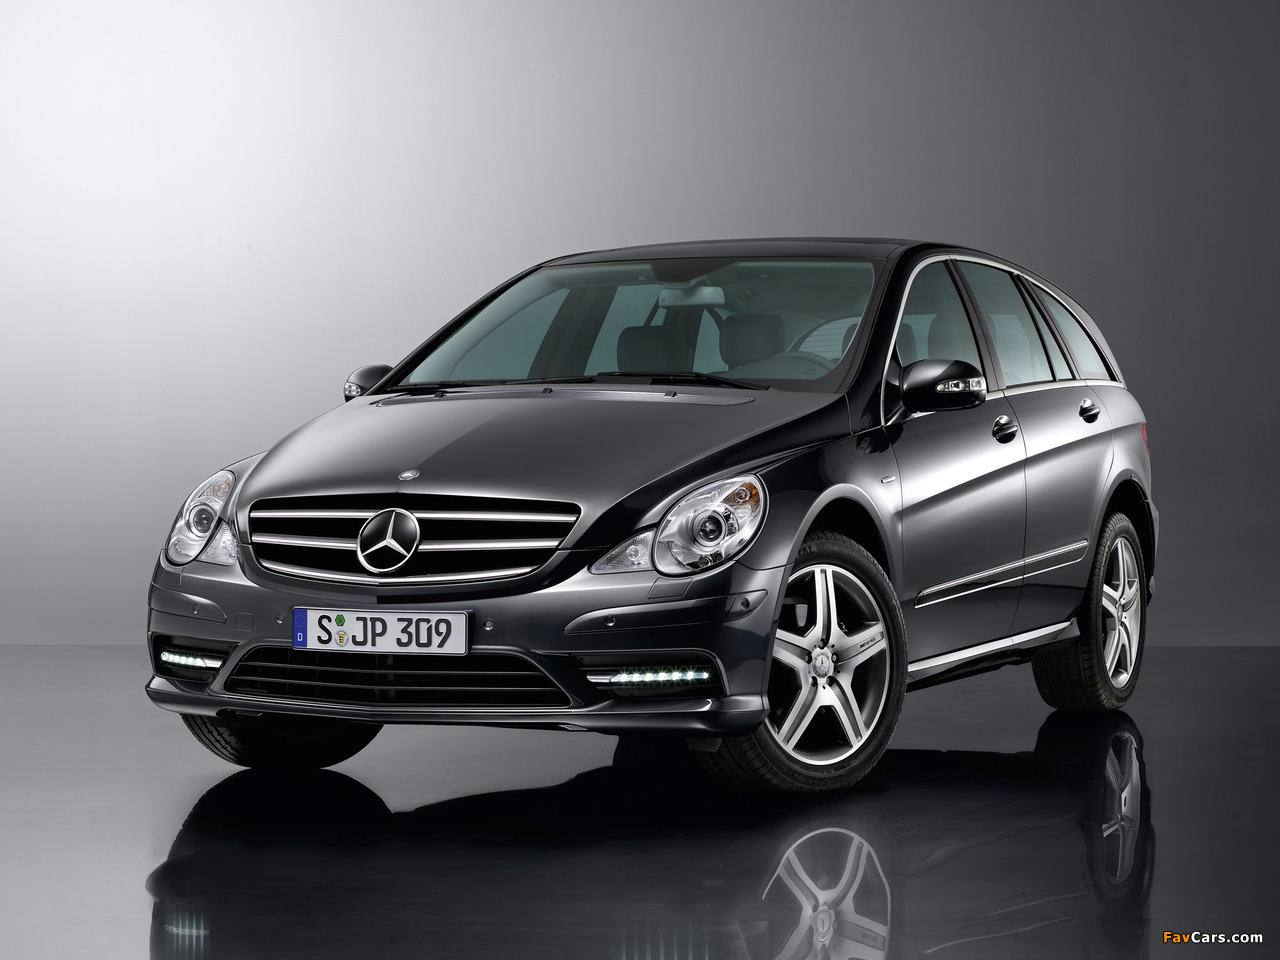 Mercedes-Benz R 350 CDI Grand Edition (W251) 2009 pictures (1280 x 960)